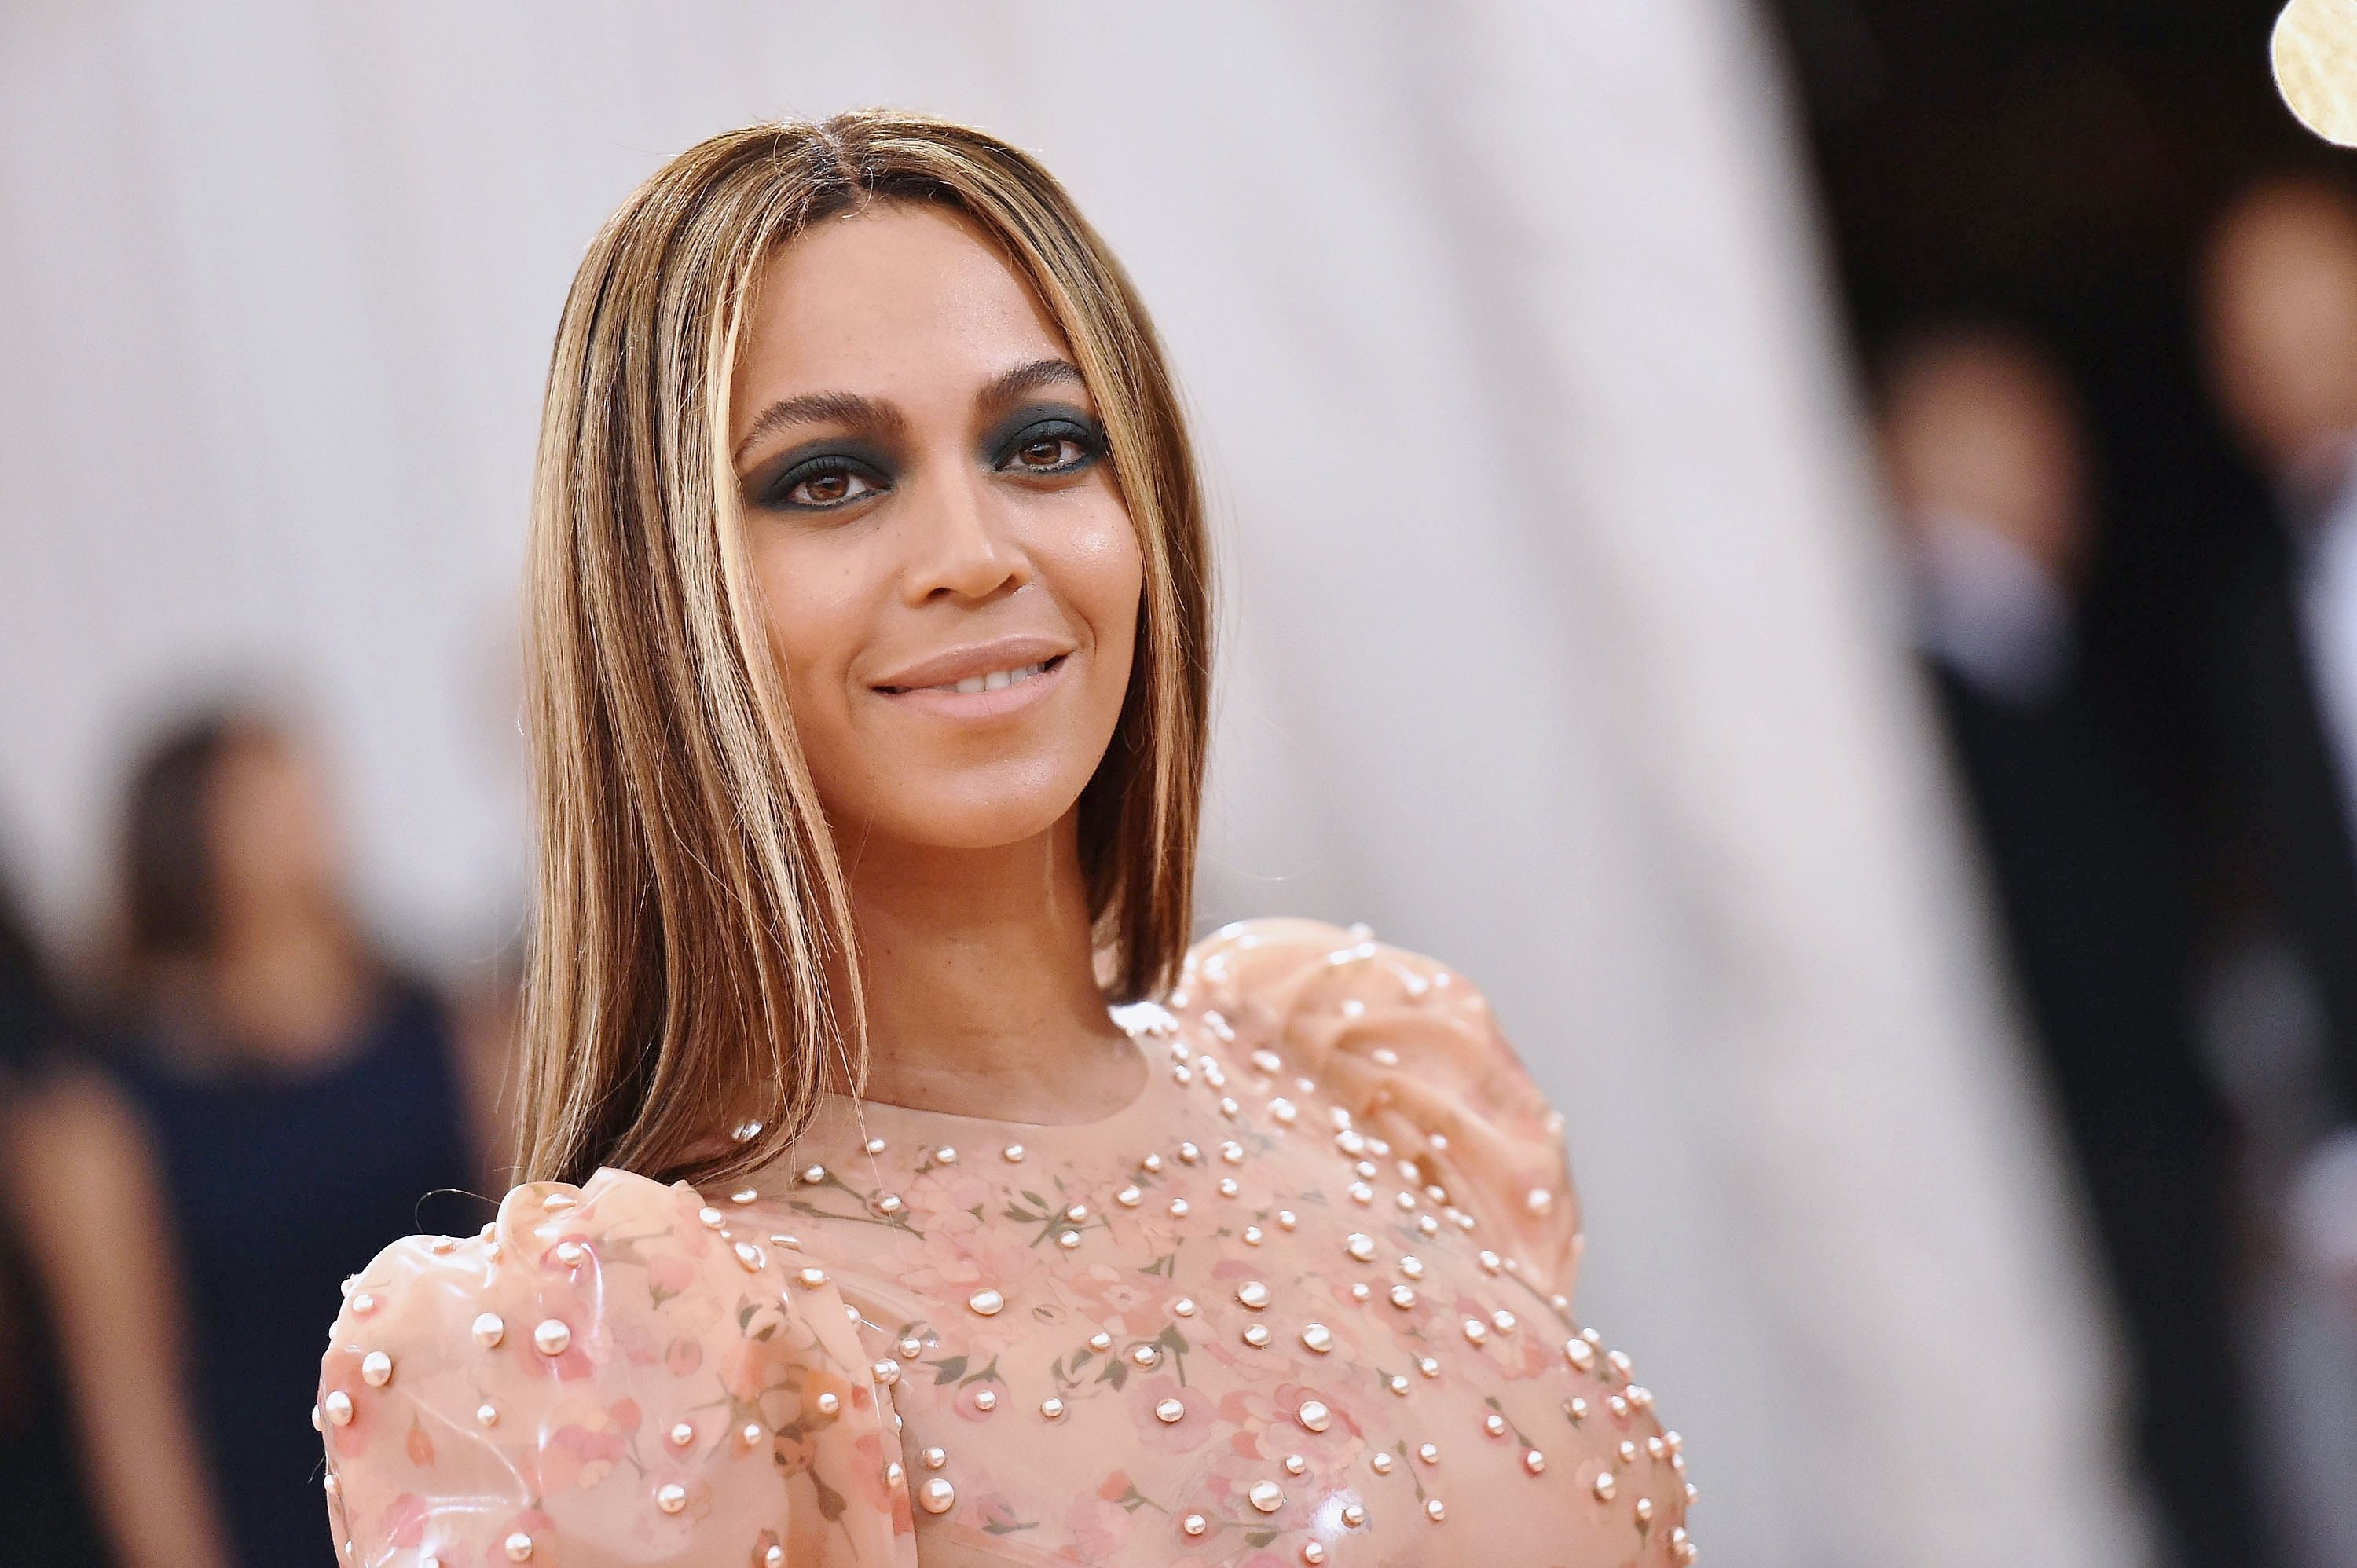 beyonce quotes about beauty